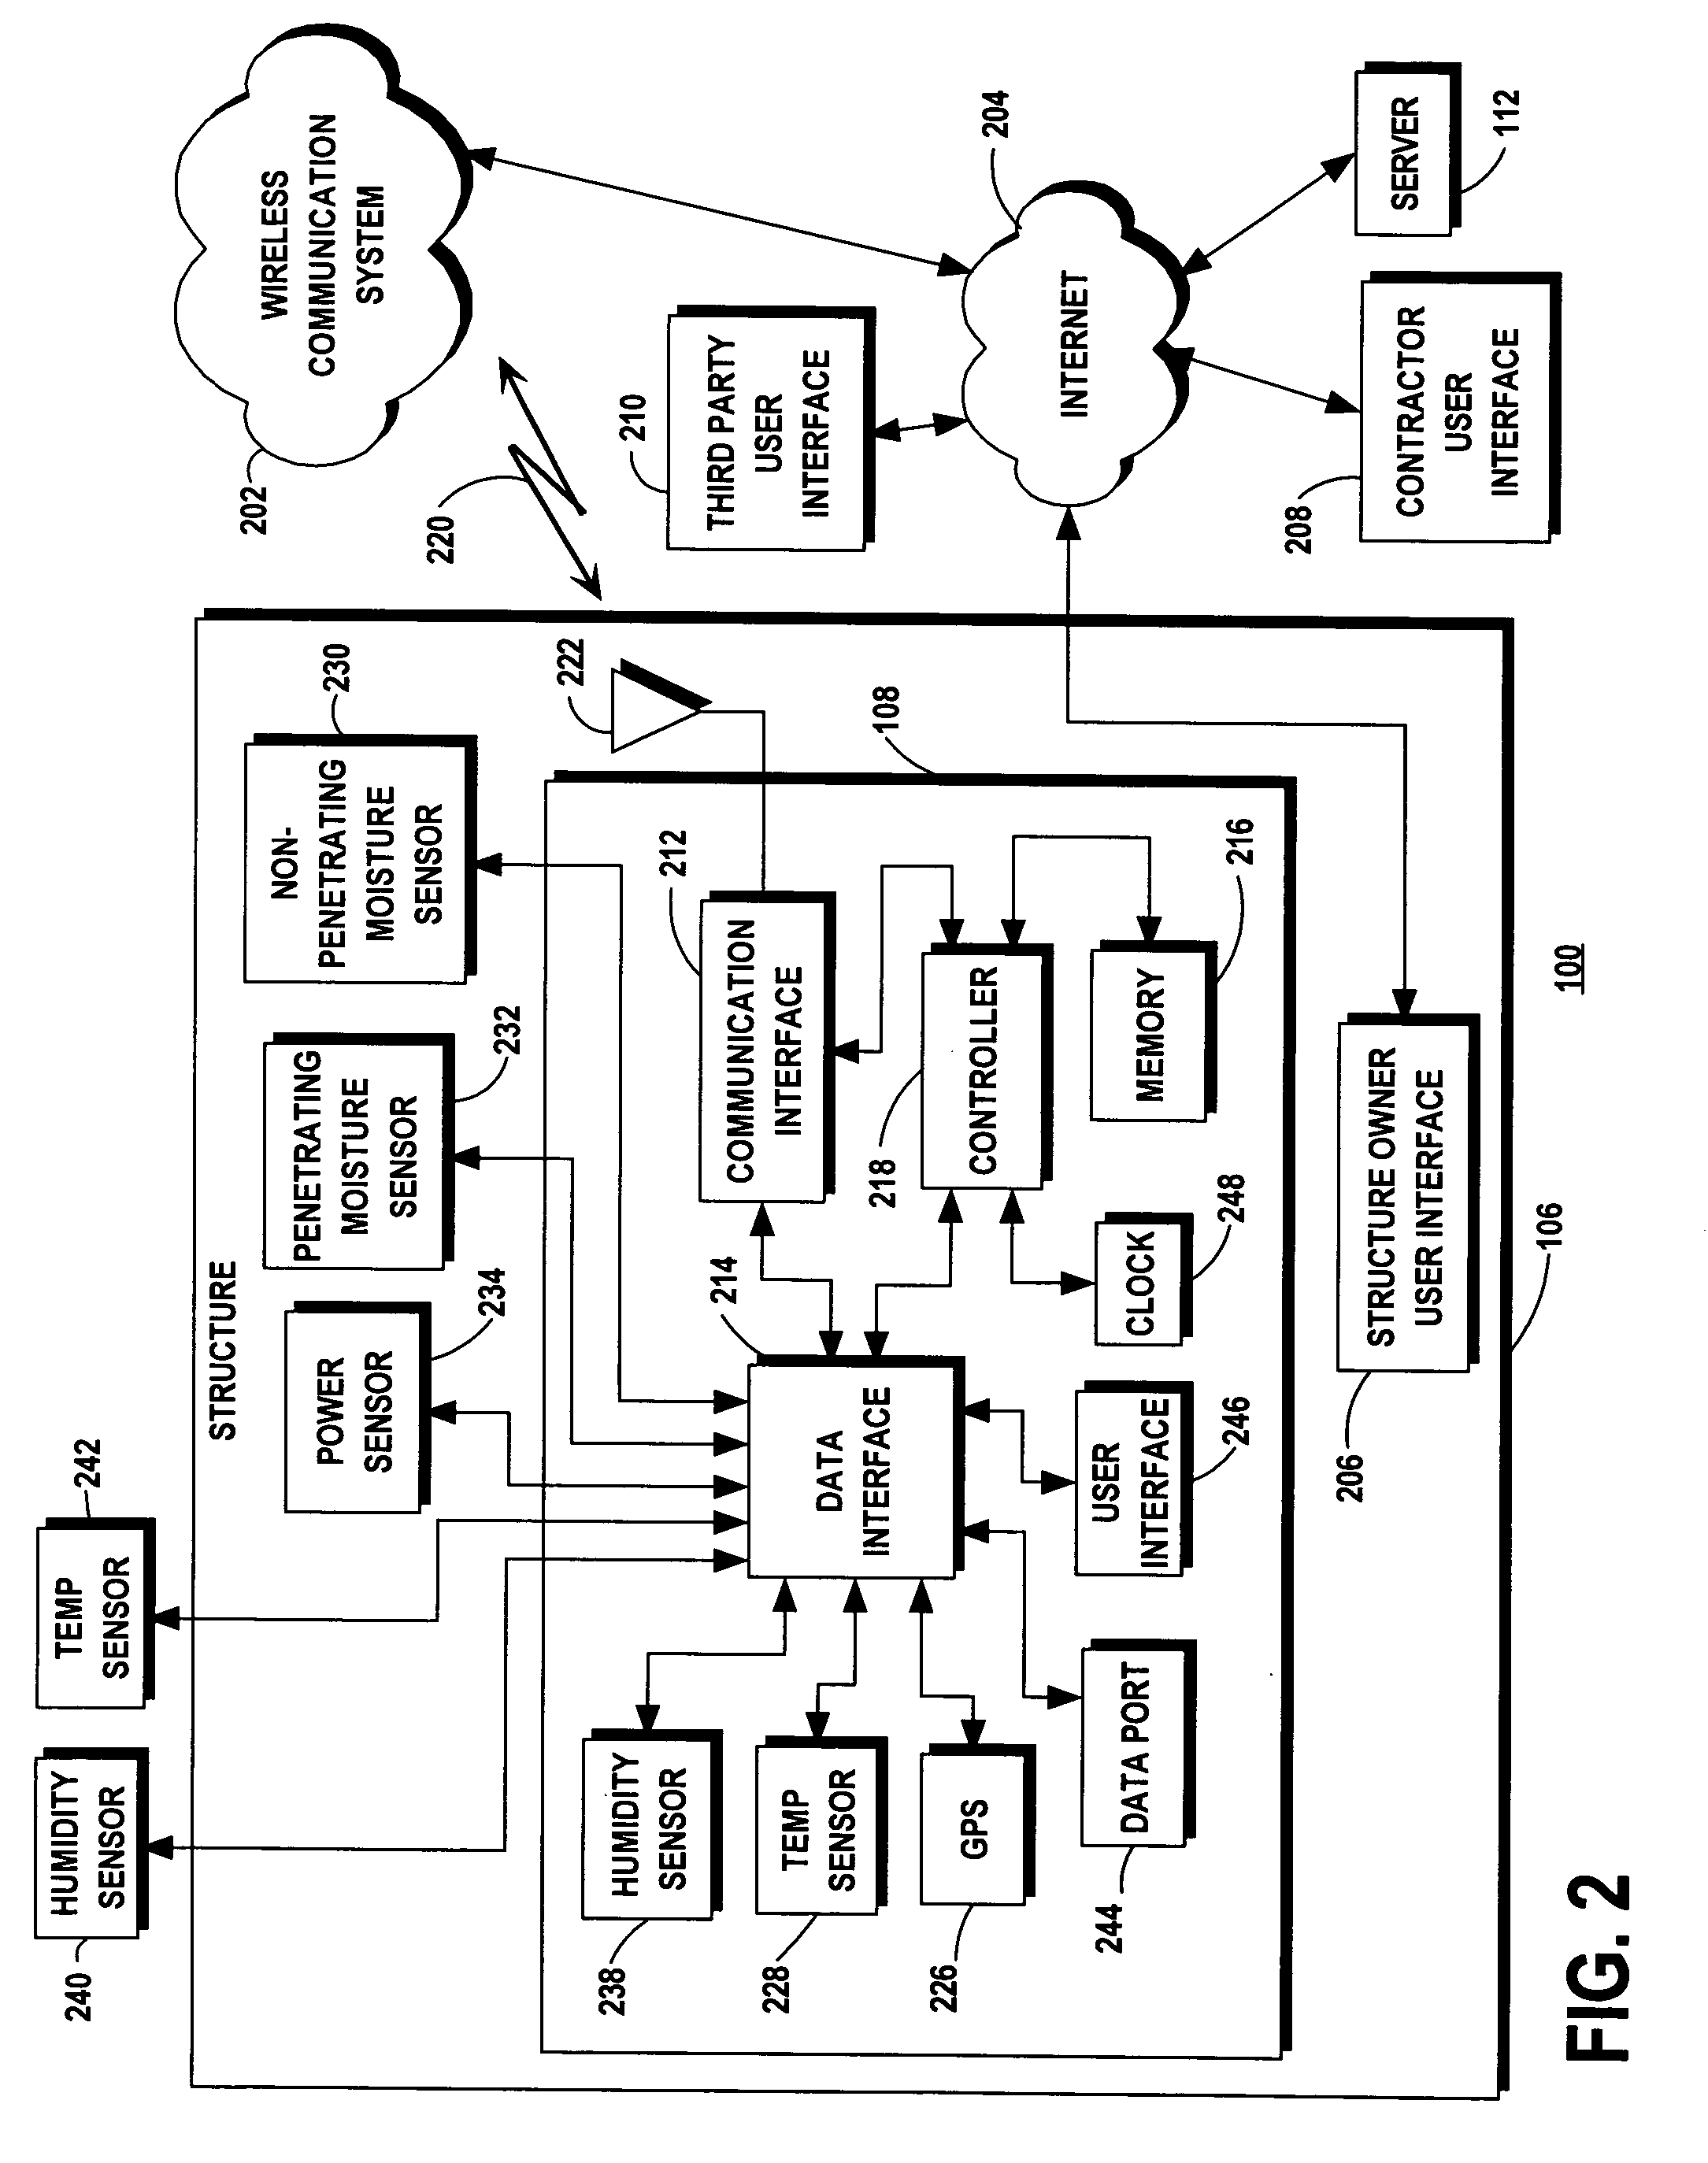 Apparatus, system and method for monitoring a drying procedure